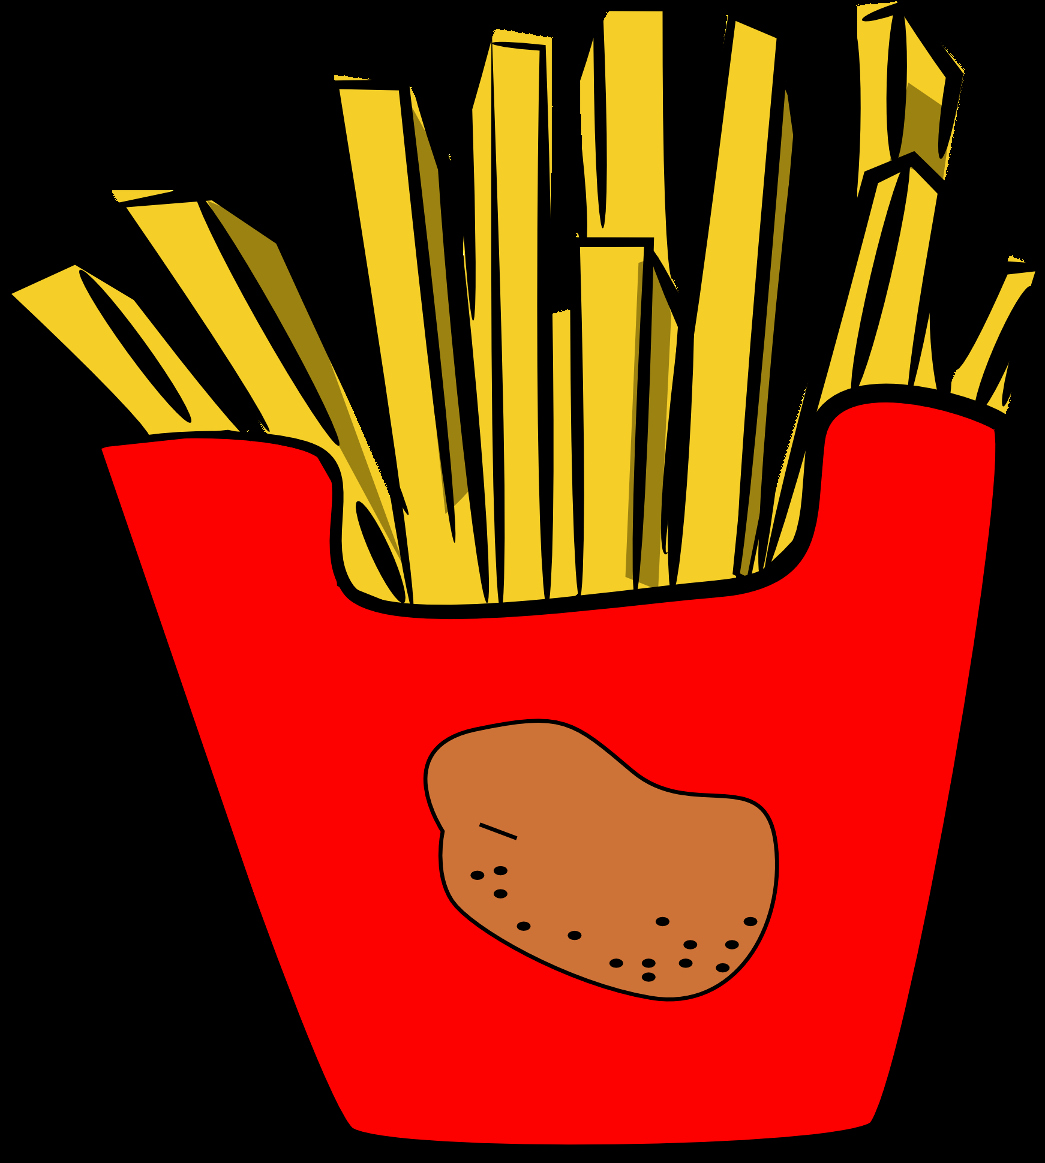 Completely Free Clip Art Lovely the totally Free Clip Art Blog Food French Fries